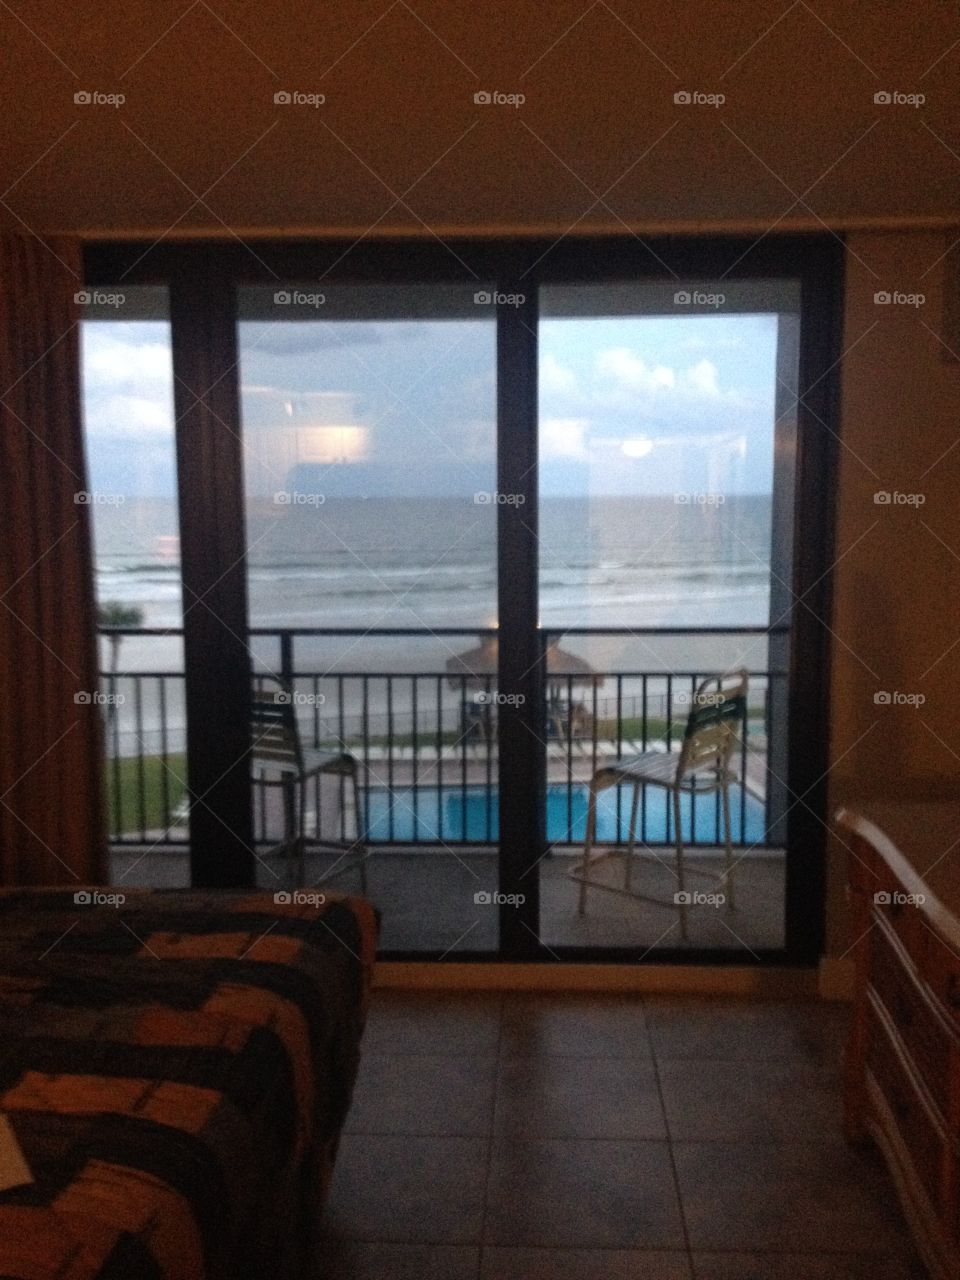 View from our room at Daytona beach Florida 